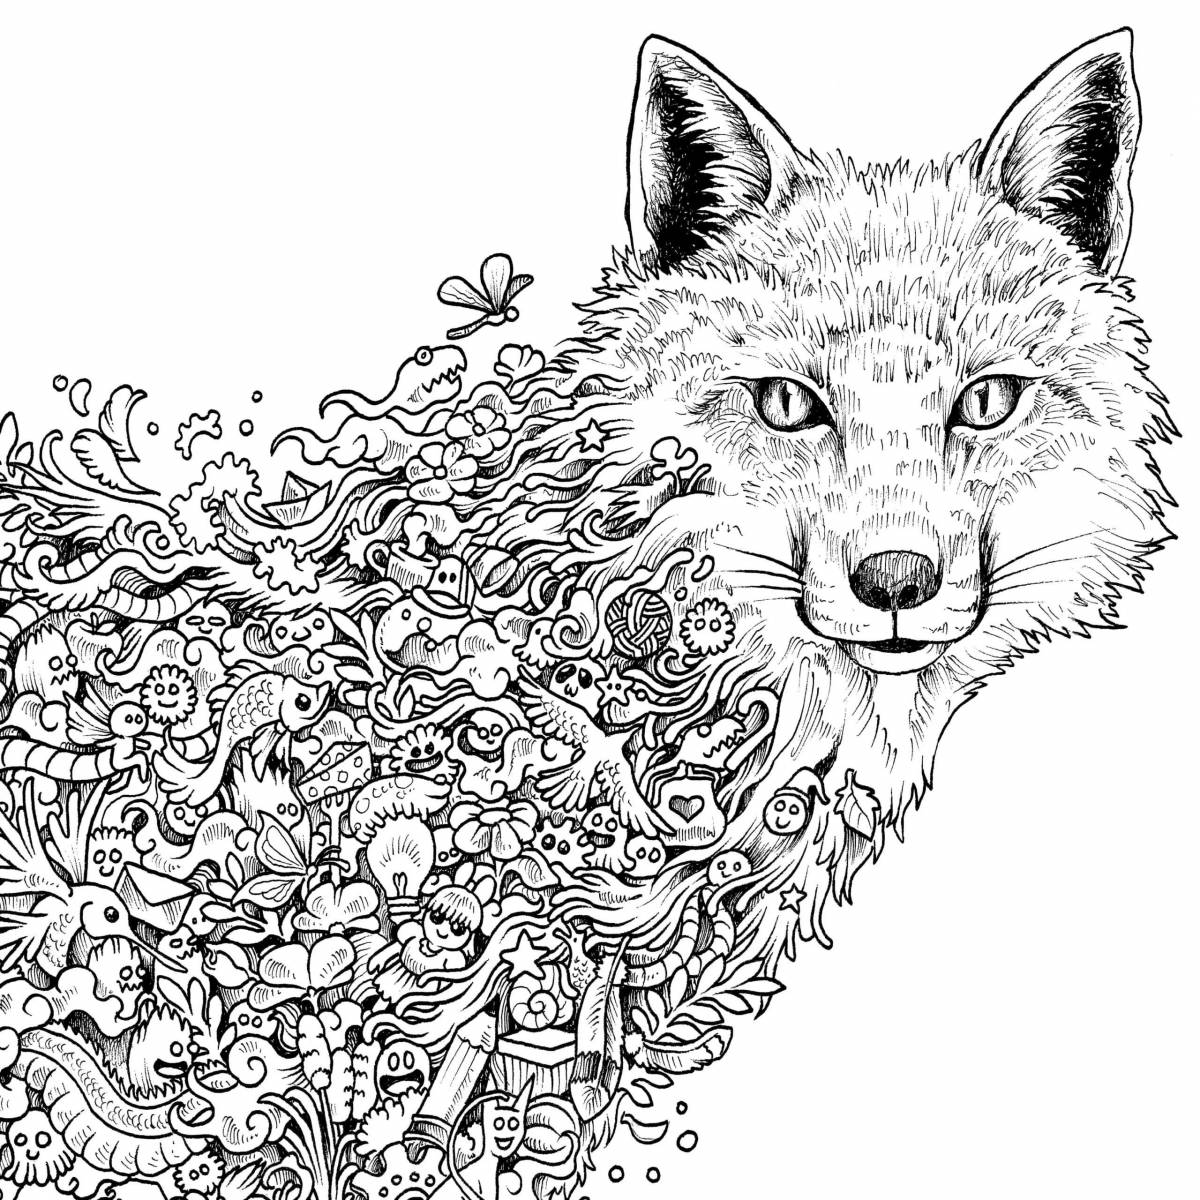 Witty fox coloring book for adults